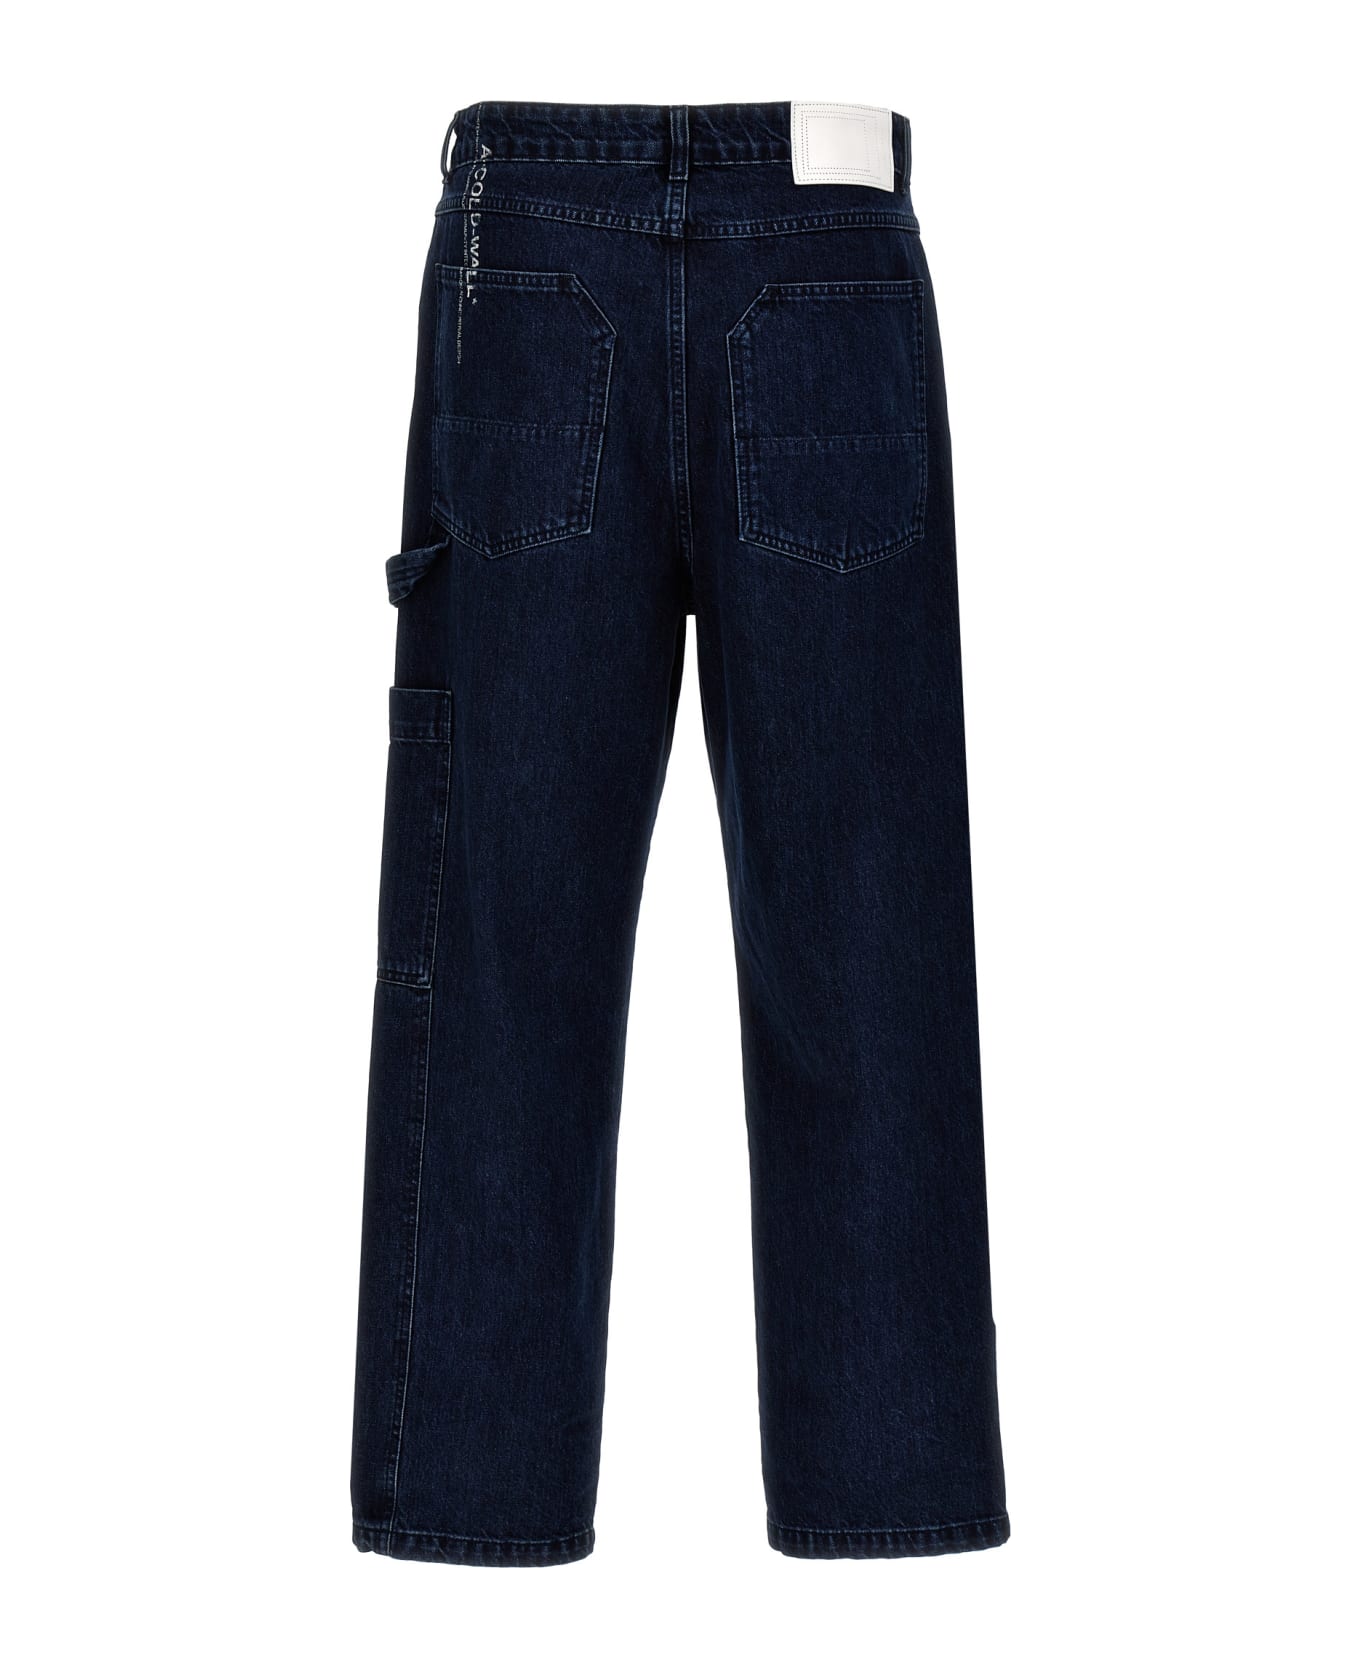 A-COLD-WALL 'discourse' Jeans - Blue